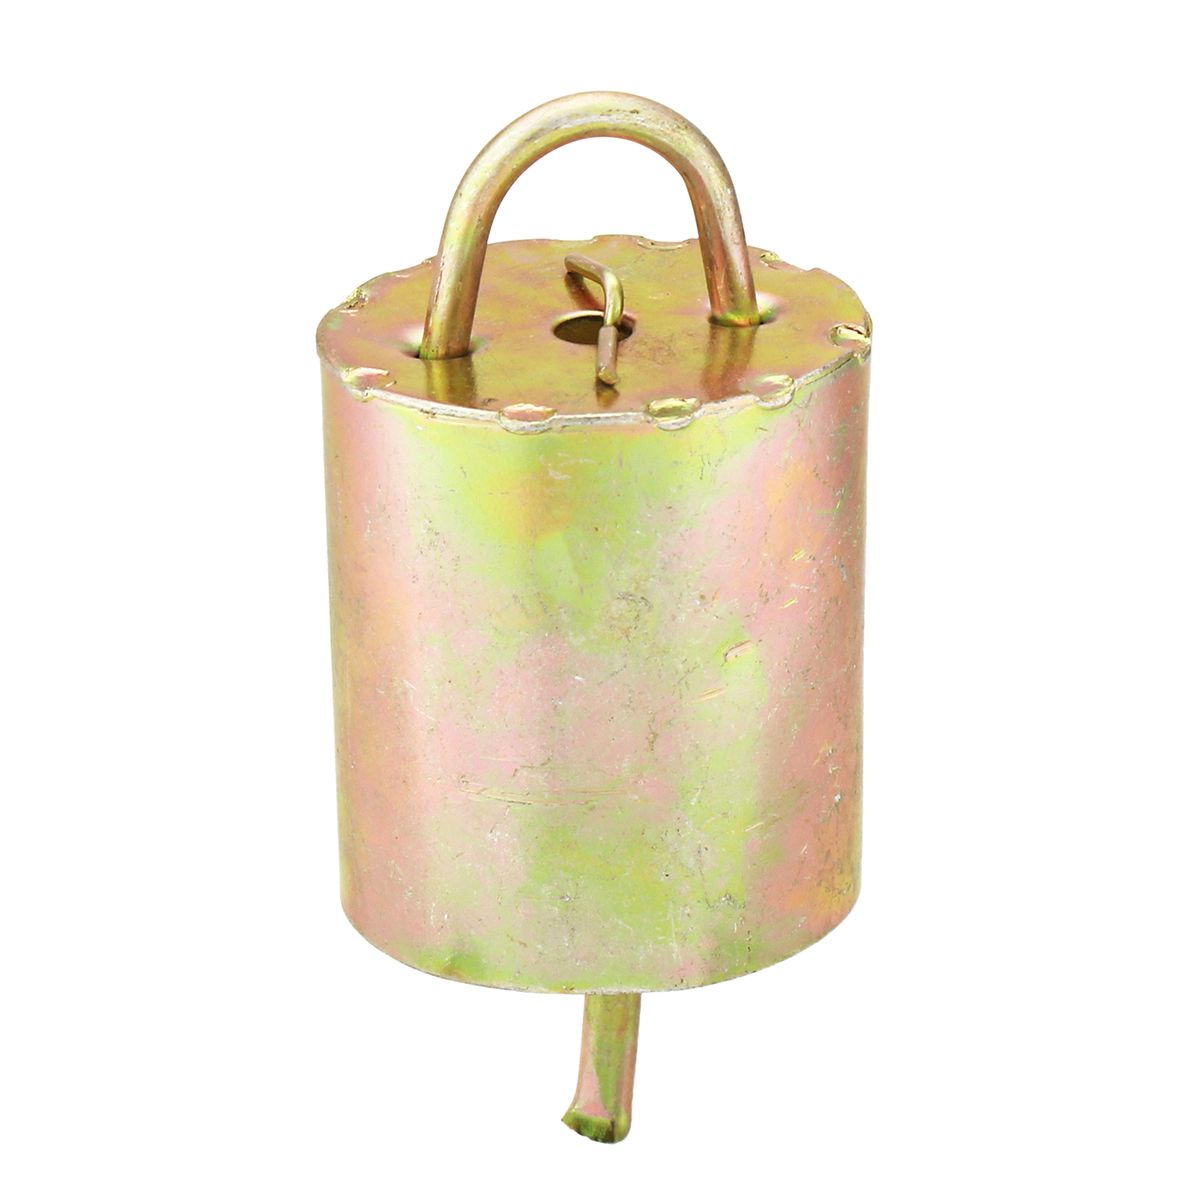 35x6cm-Copper-Bell-Cow-Horse-Dog-Sheep-Grazing-Cattle-Farm-Animal-Loud-Brass-Casting-Bell-Decoration-1386719